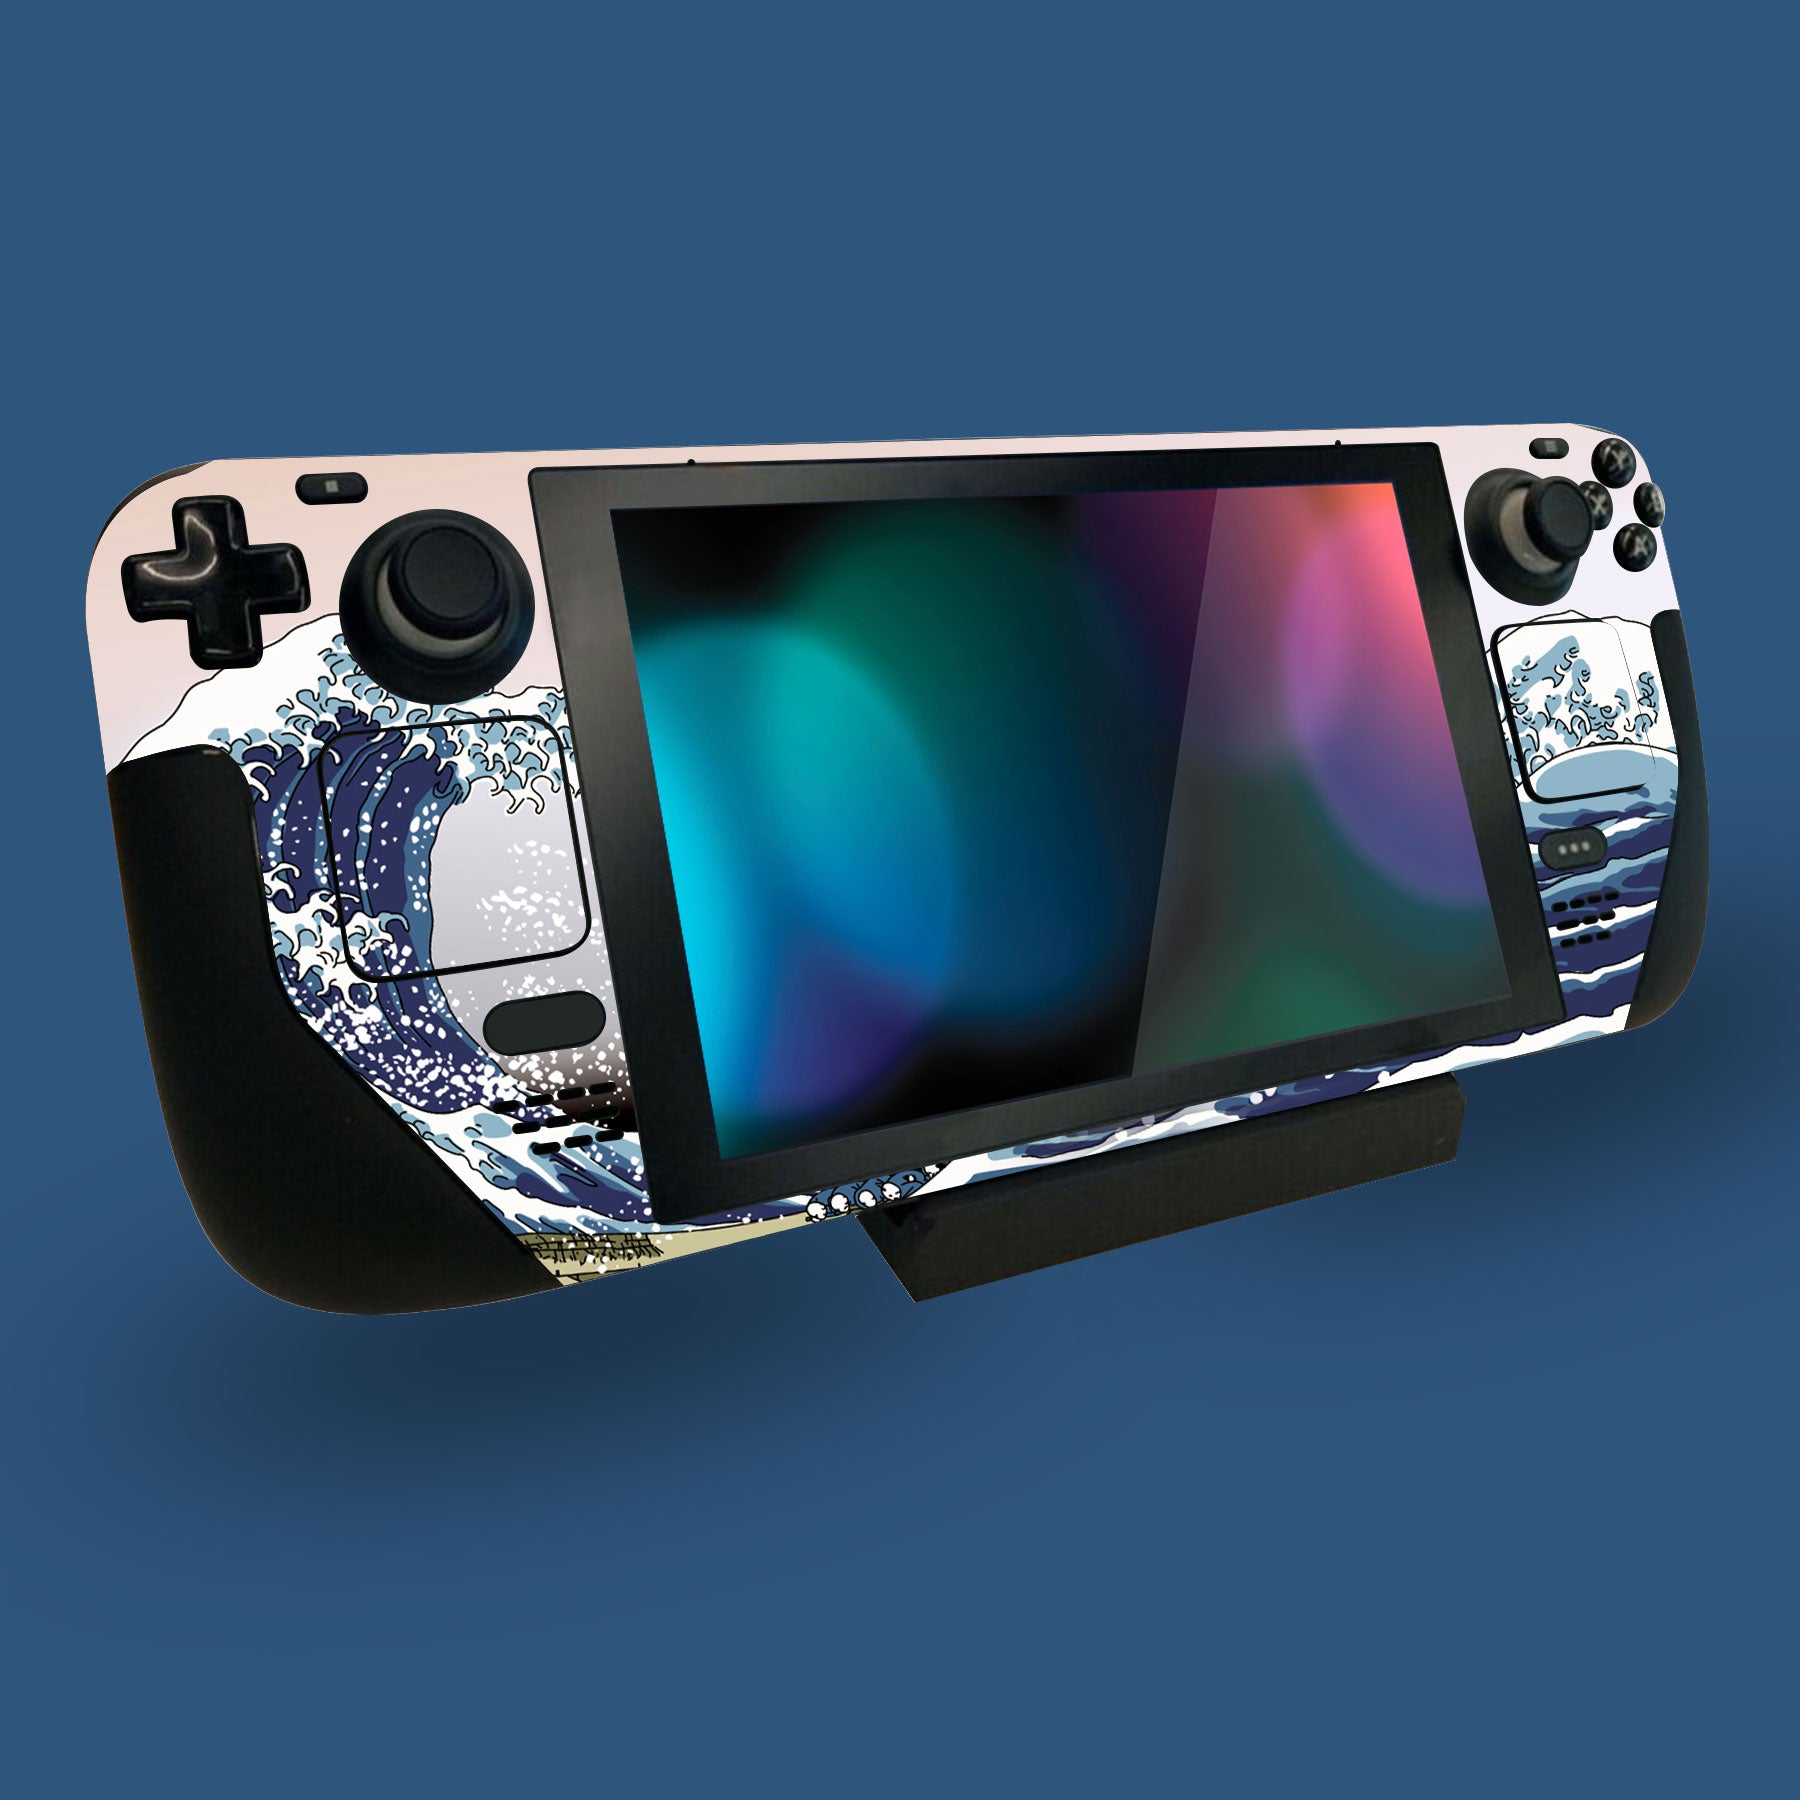 For Steam Deck Console Soft Silicone Camo Case Cover Full Protection Skin  Shell